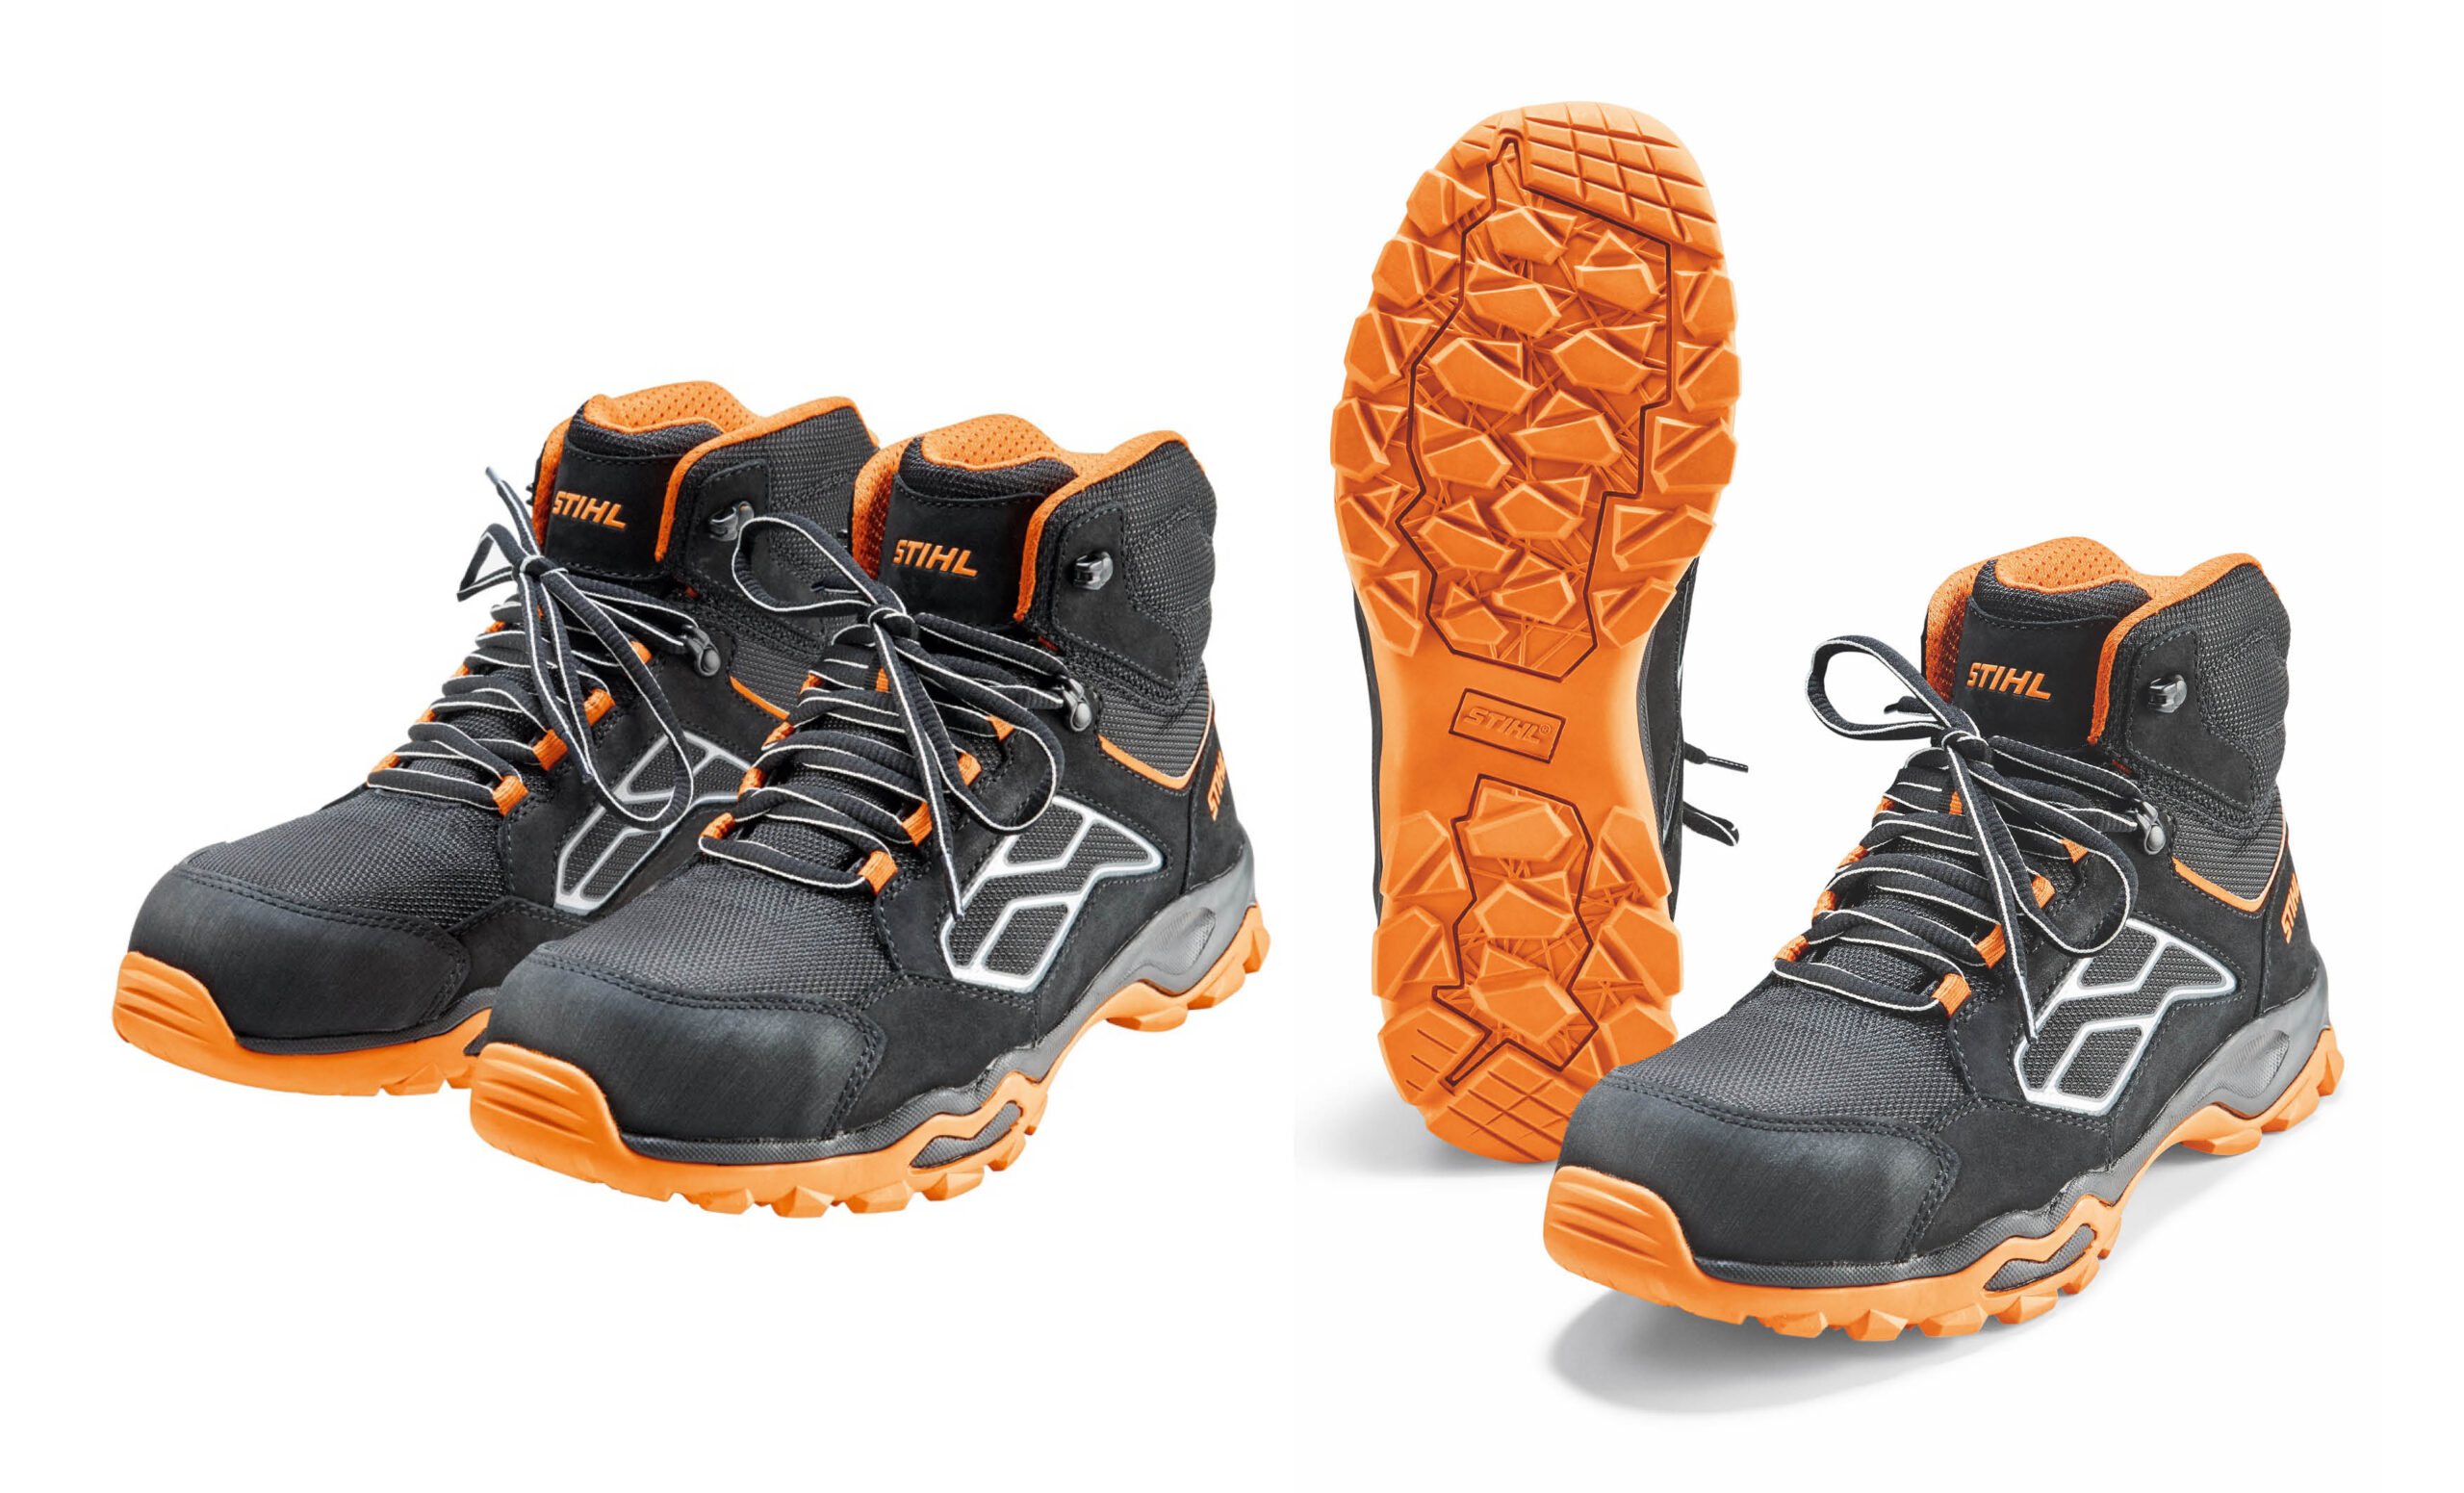 Stihl S3 SAFETY BOOTS